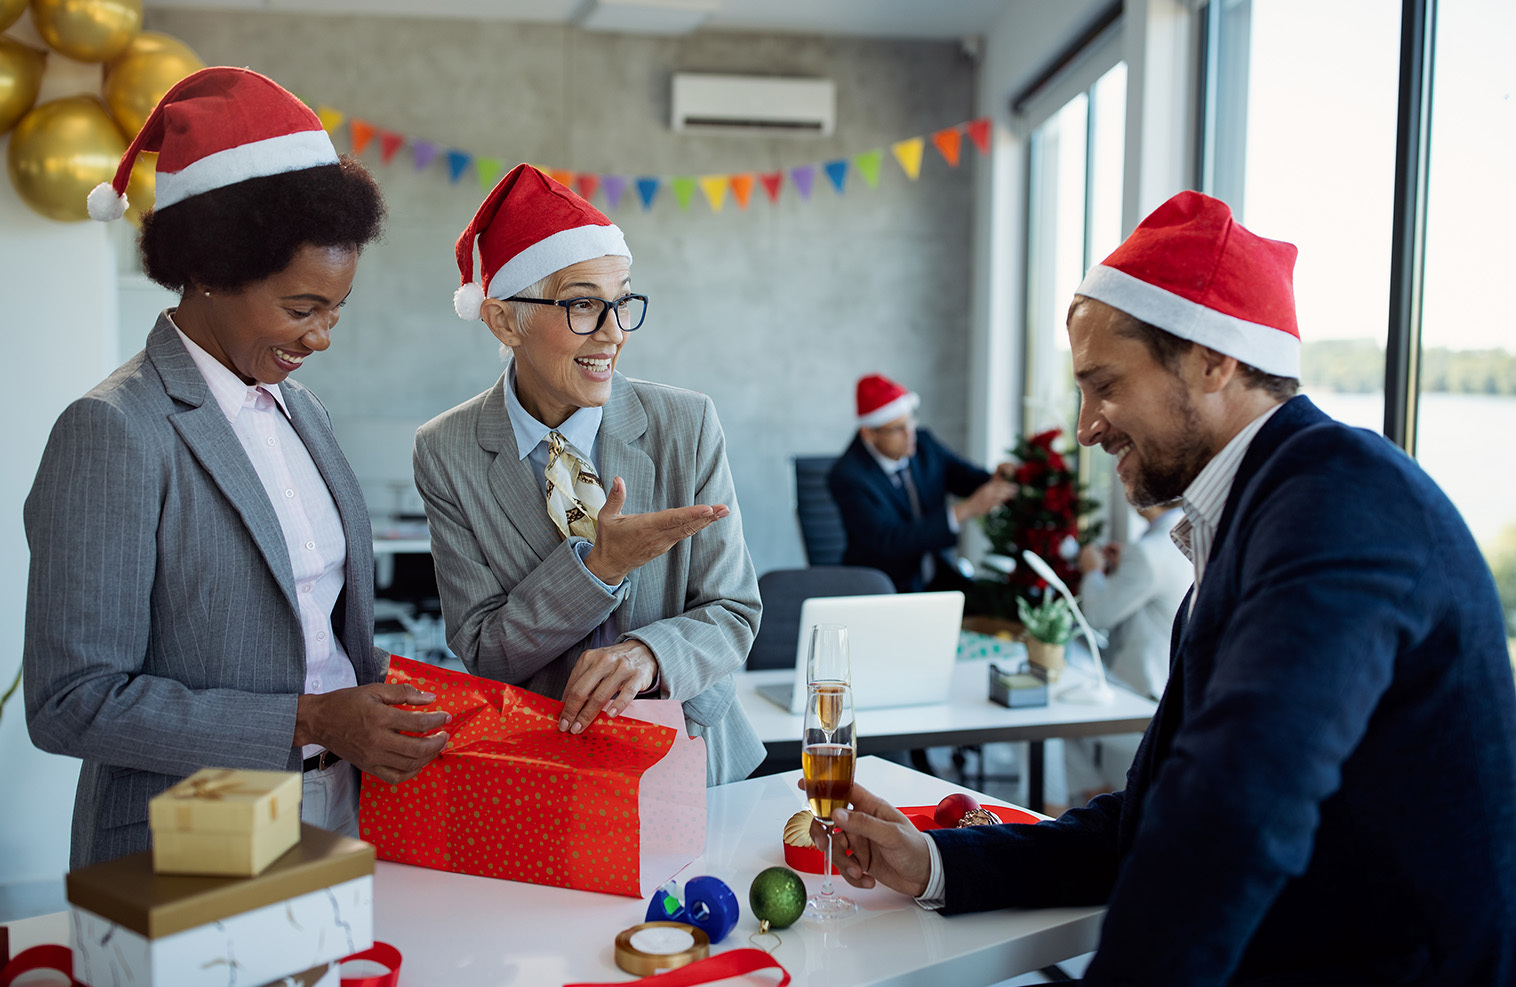 Year-end VS. holiday bonus – what, why, and do they work? How?